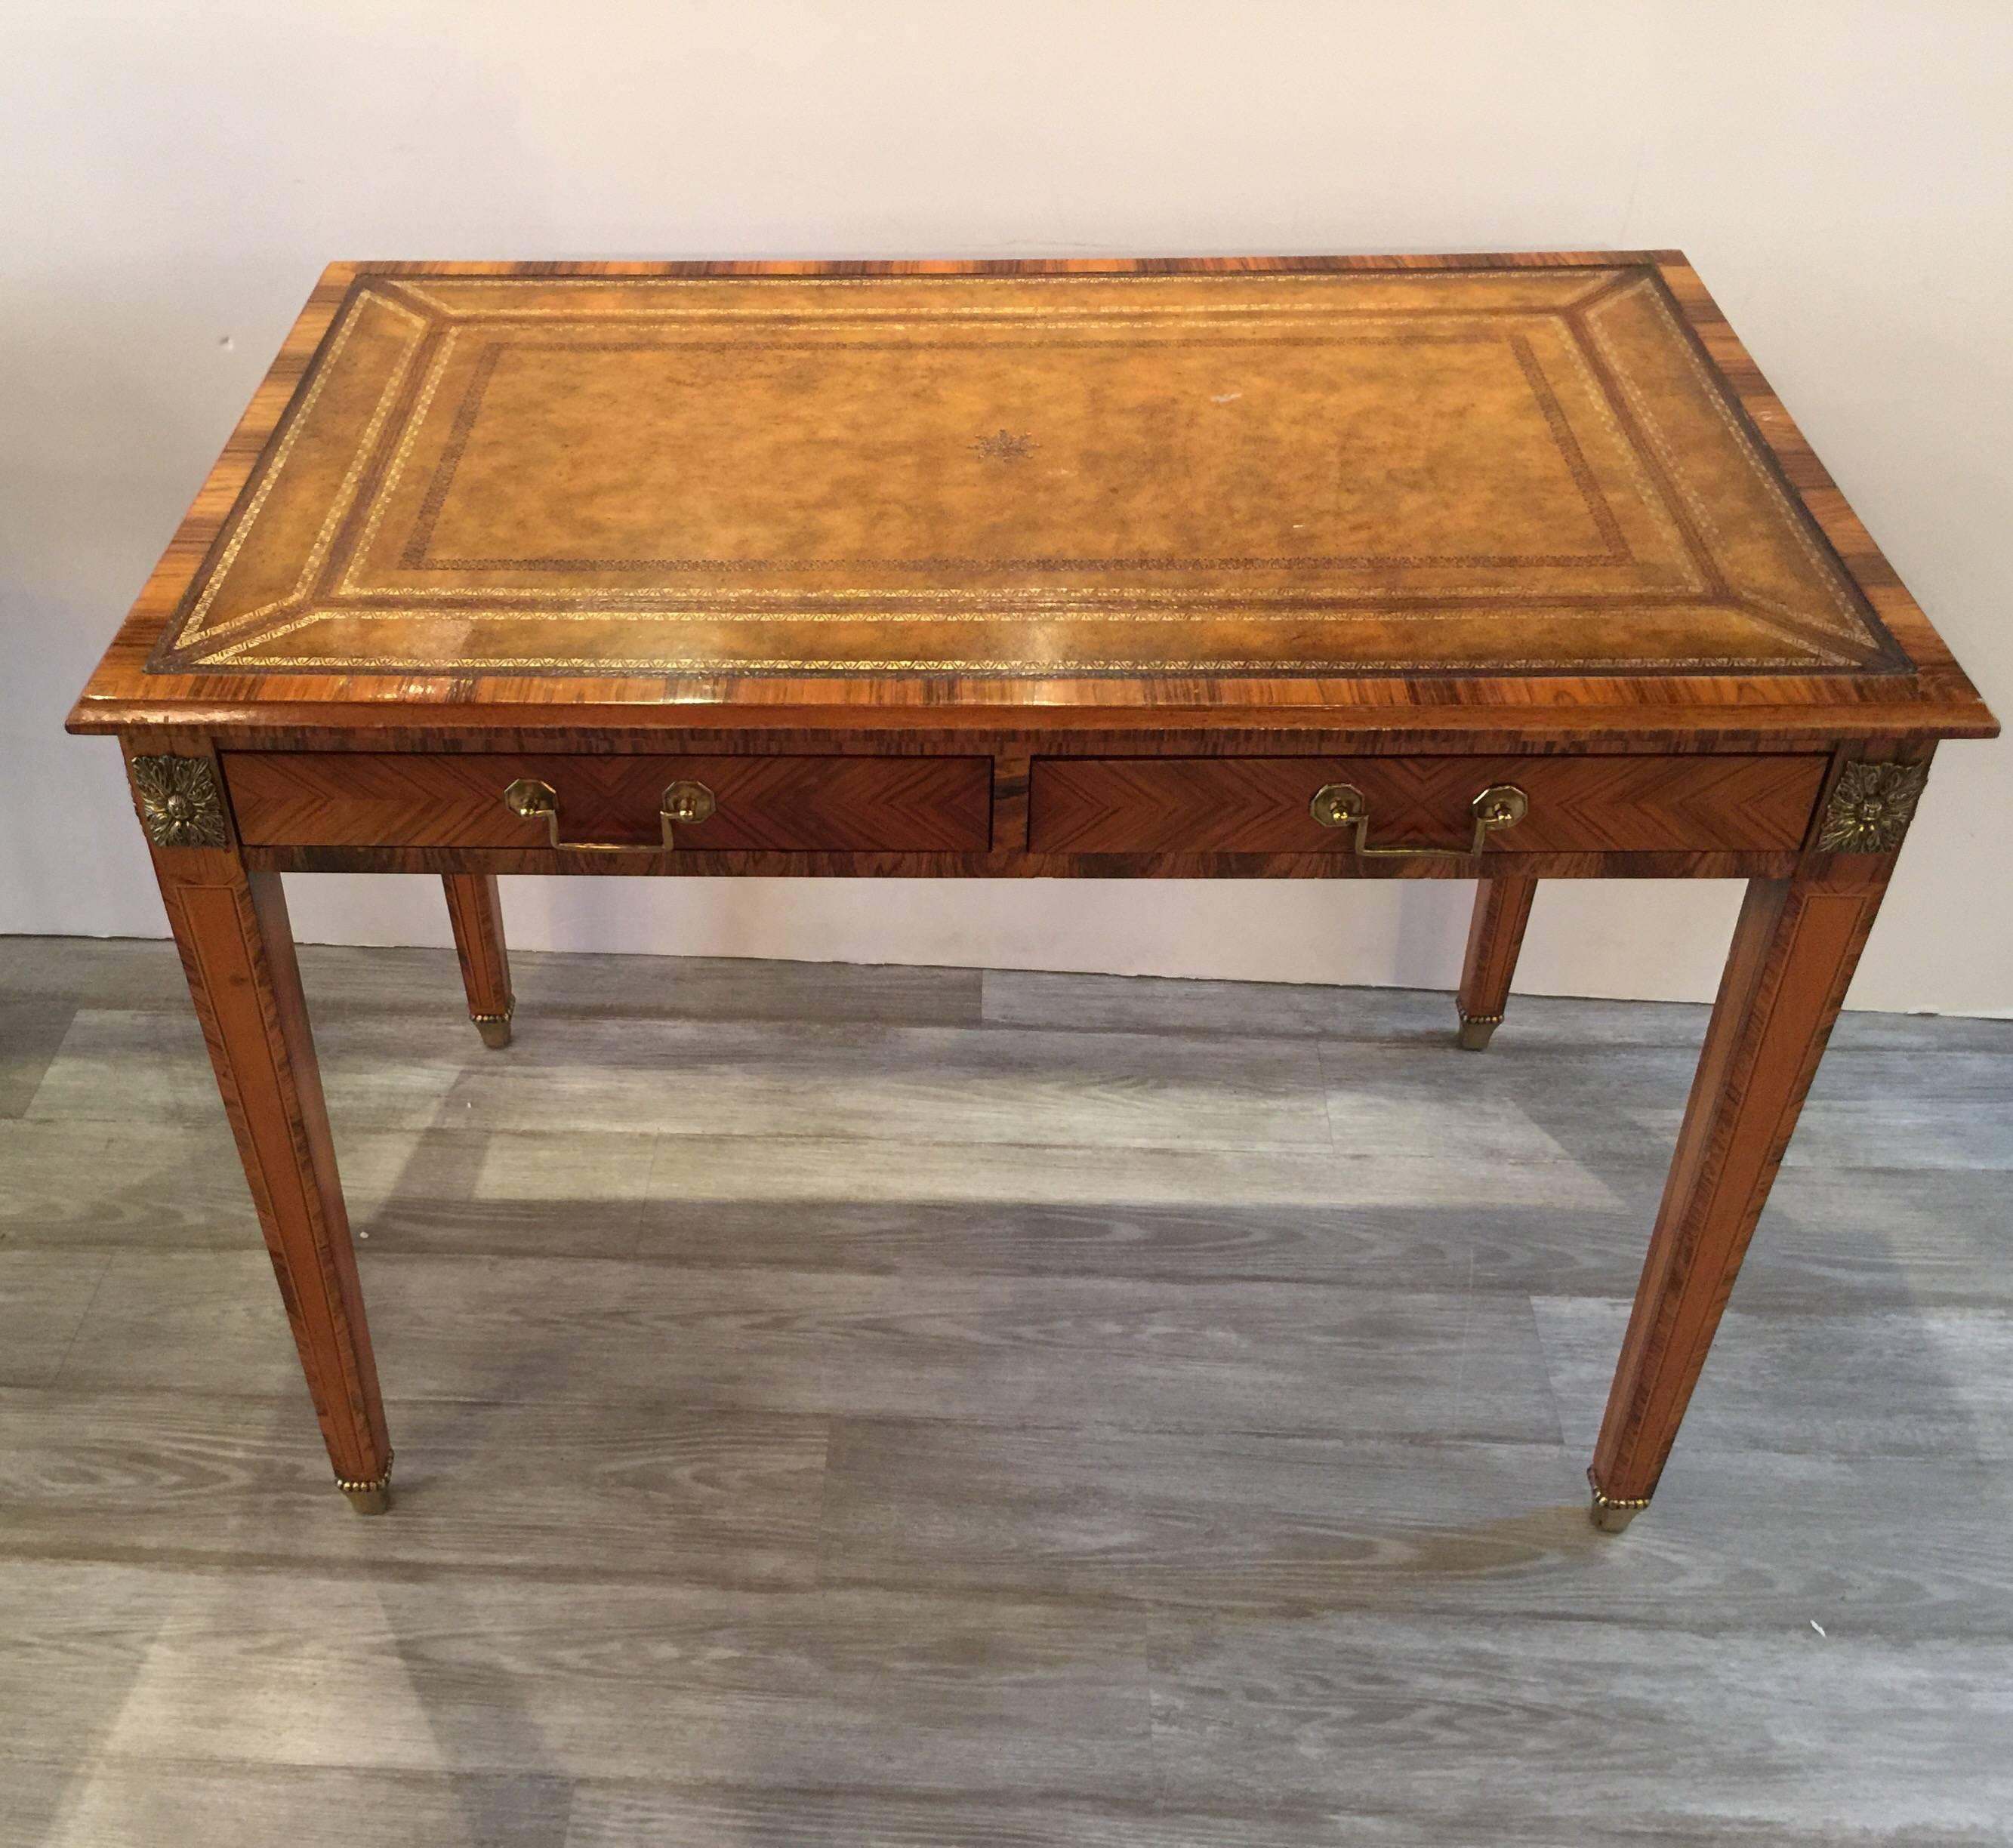 Handsome rosewood and leather desk with ormolu mounts. The warm leather top with figurative rosewood frame and legs. The apron with two drawers. The tapering legs with rosewood along the sides. The top has to pull out trays that extend the sides 11